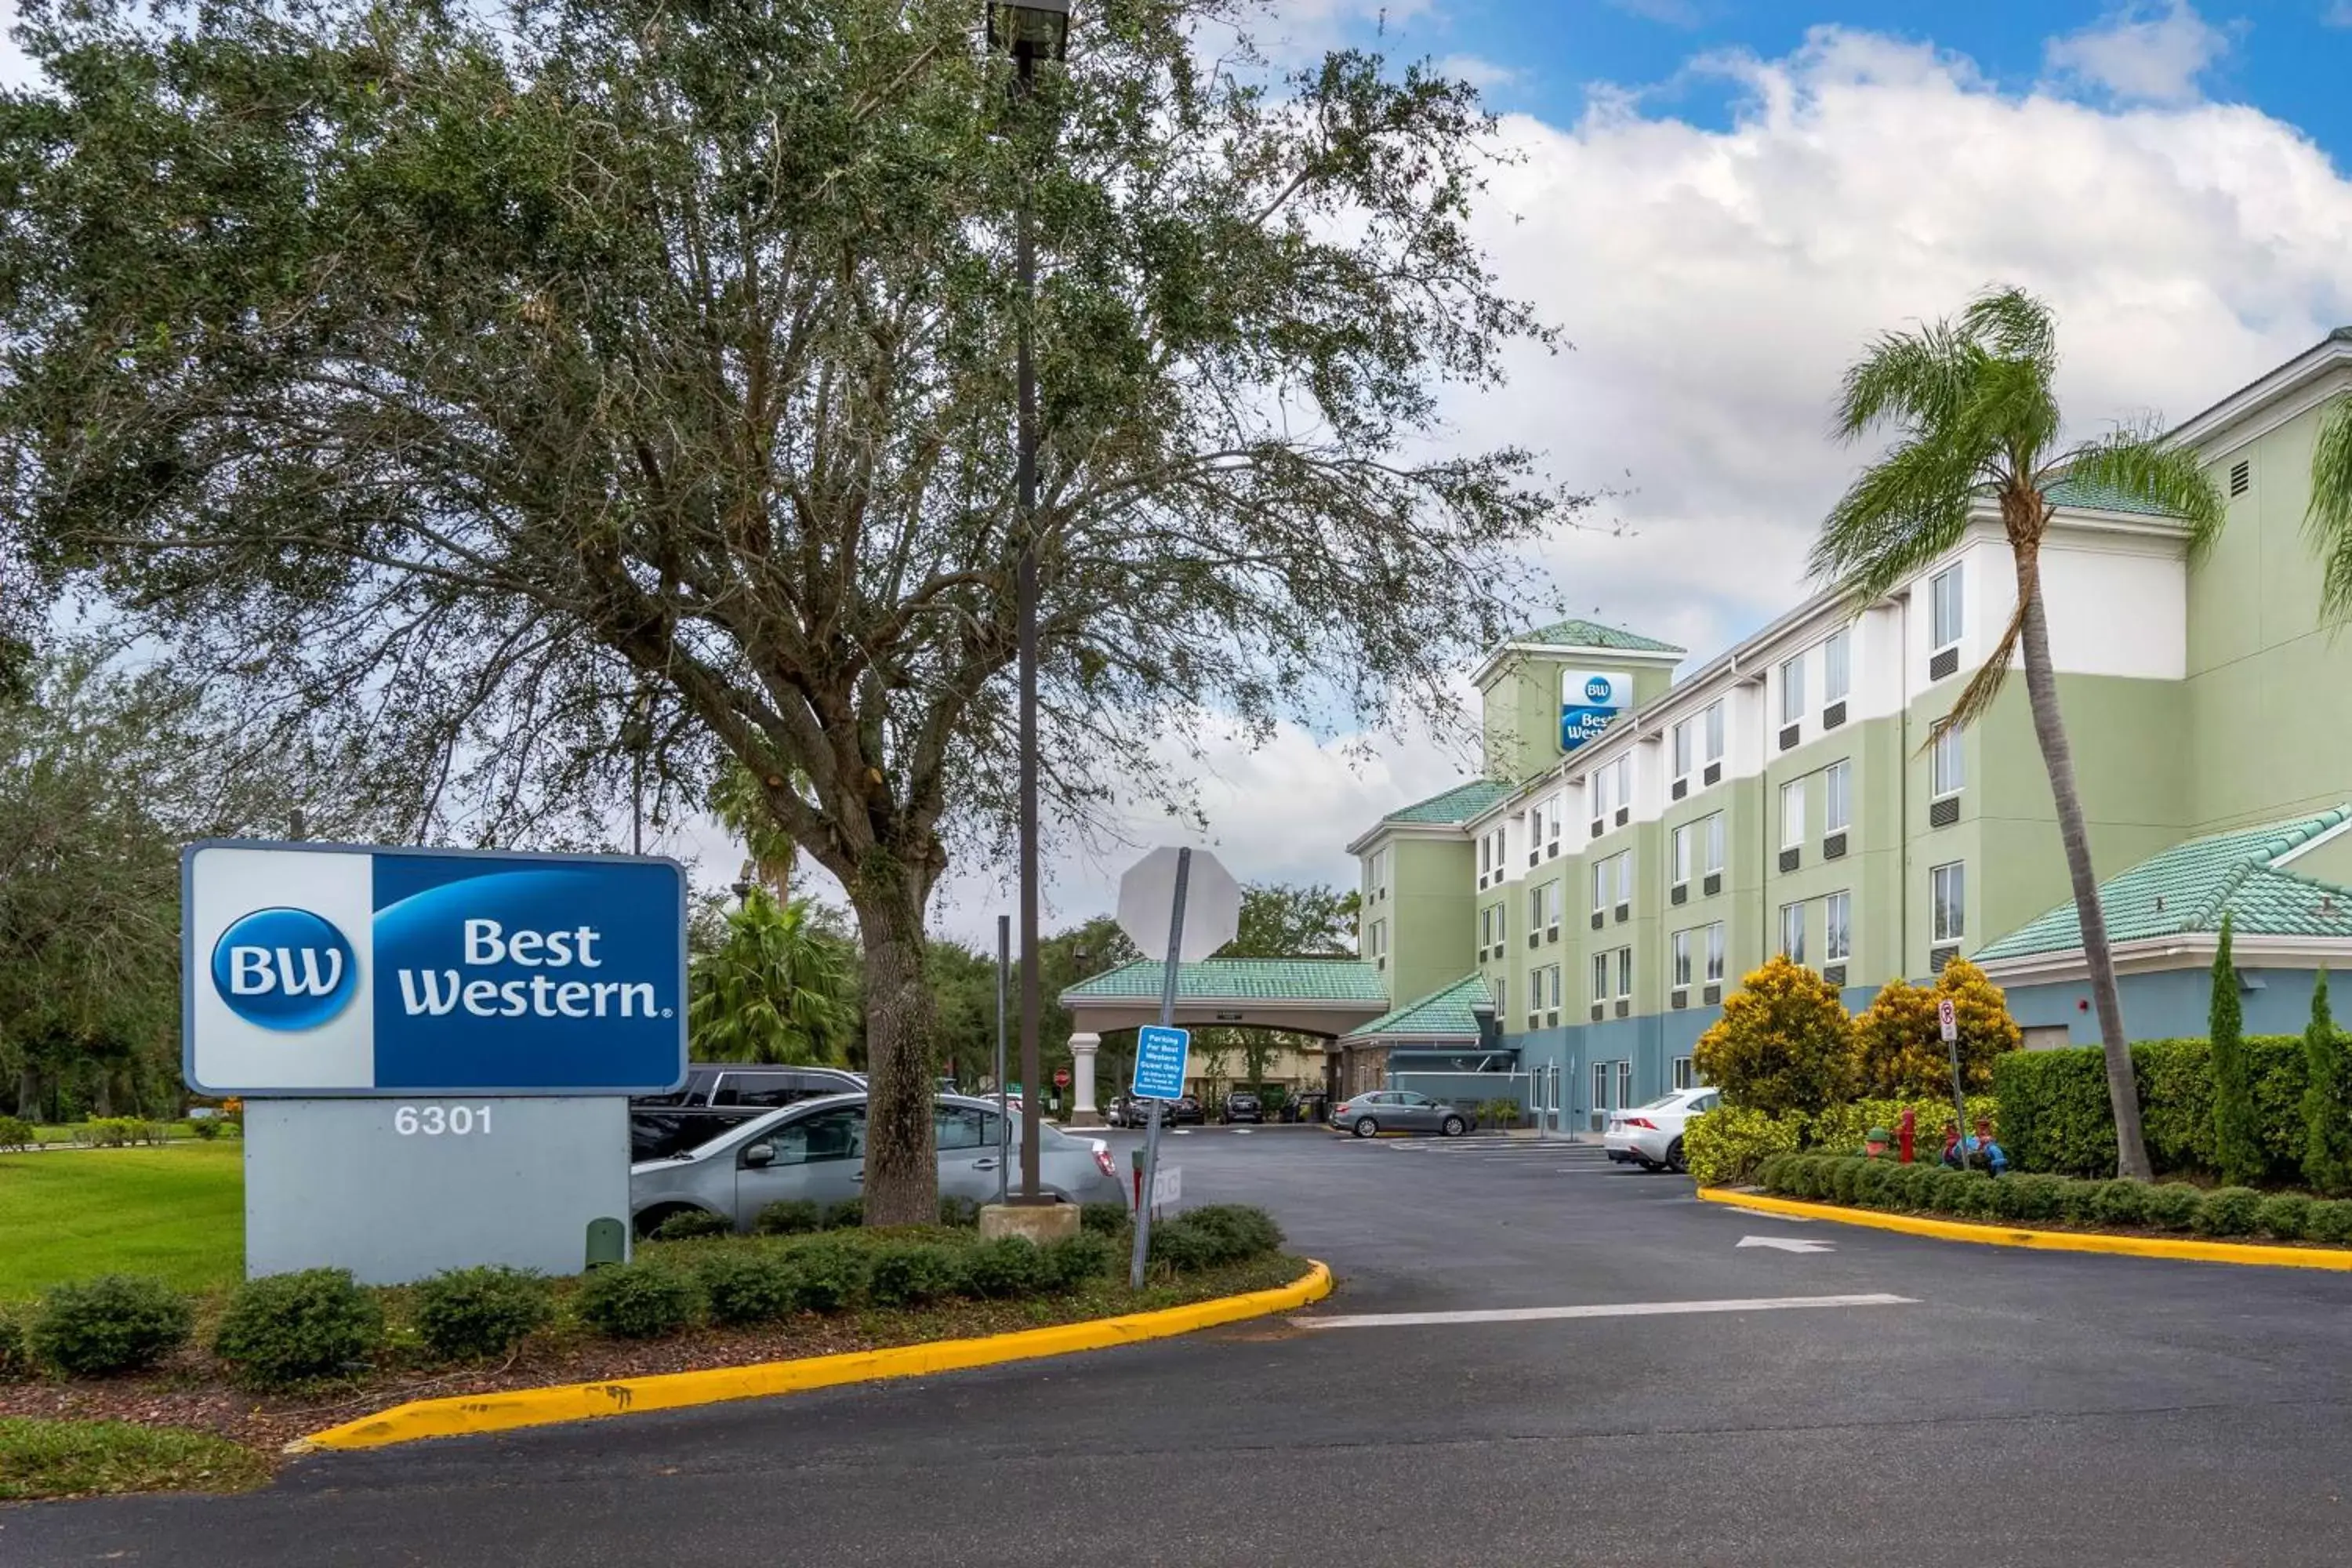 Property Building in Best Western Orlando Theme Parks